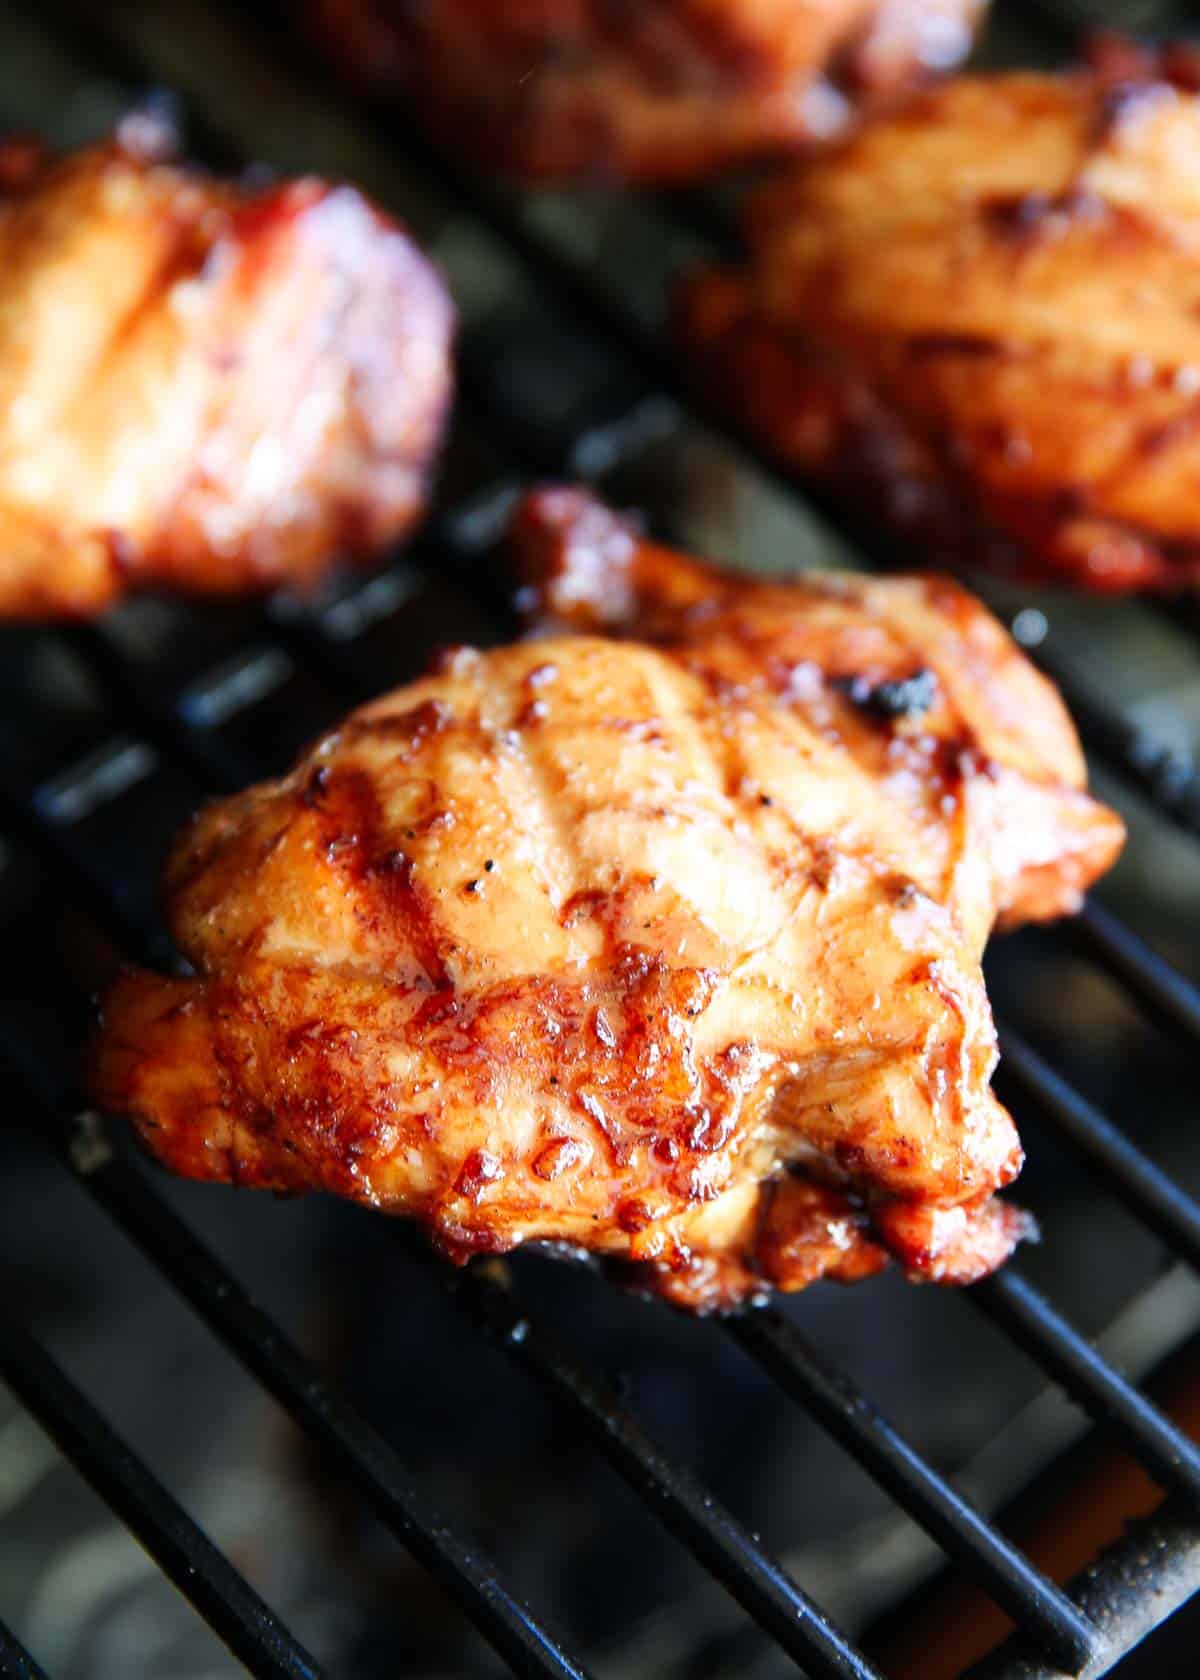 Grilled chicken thighs on the grill.